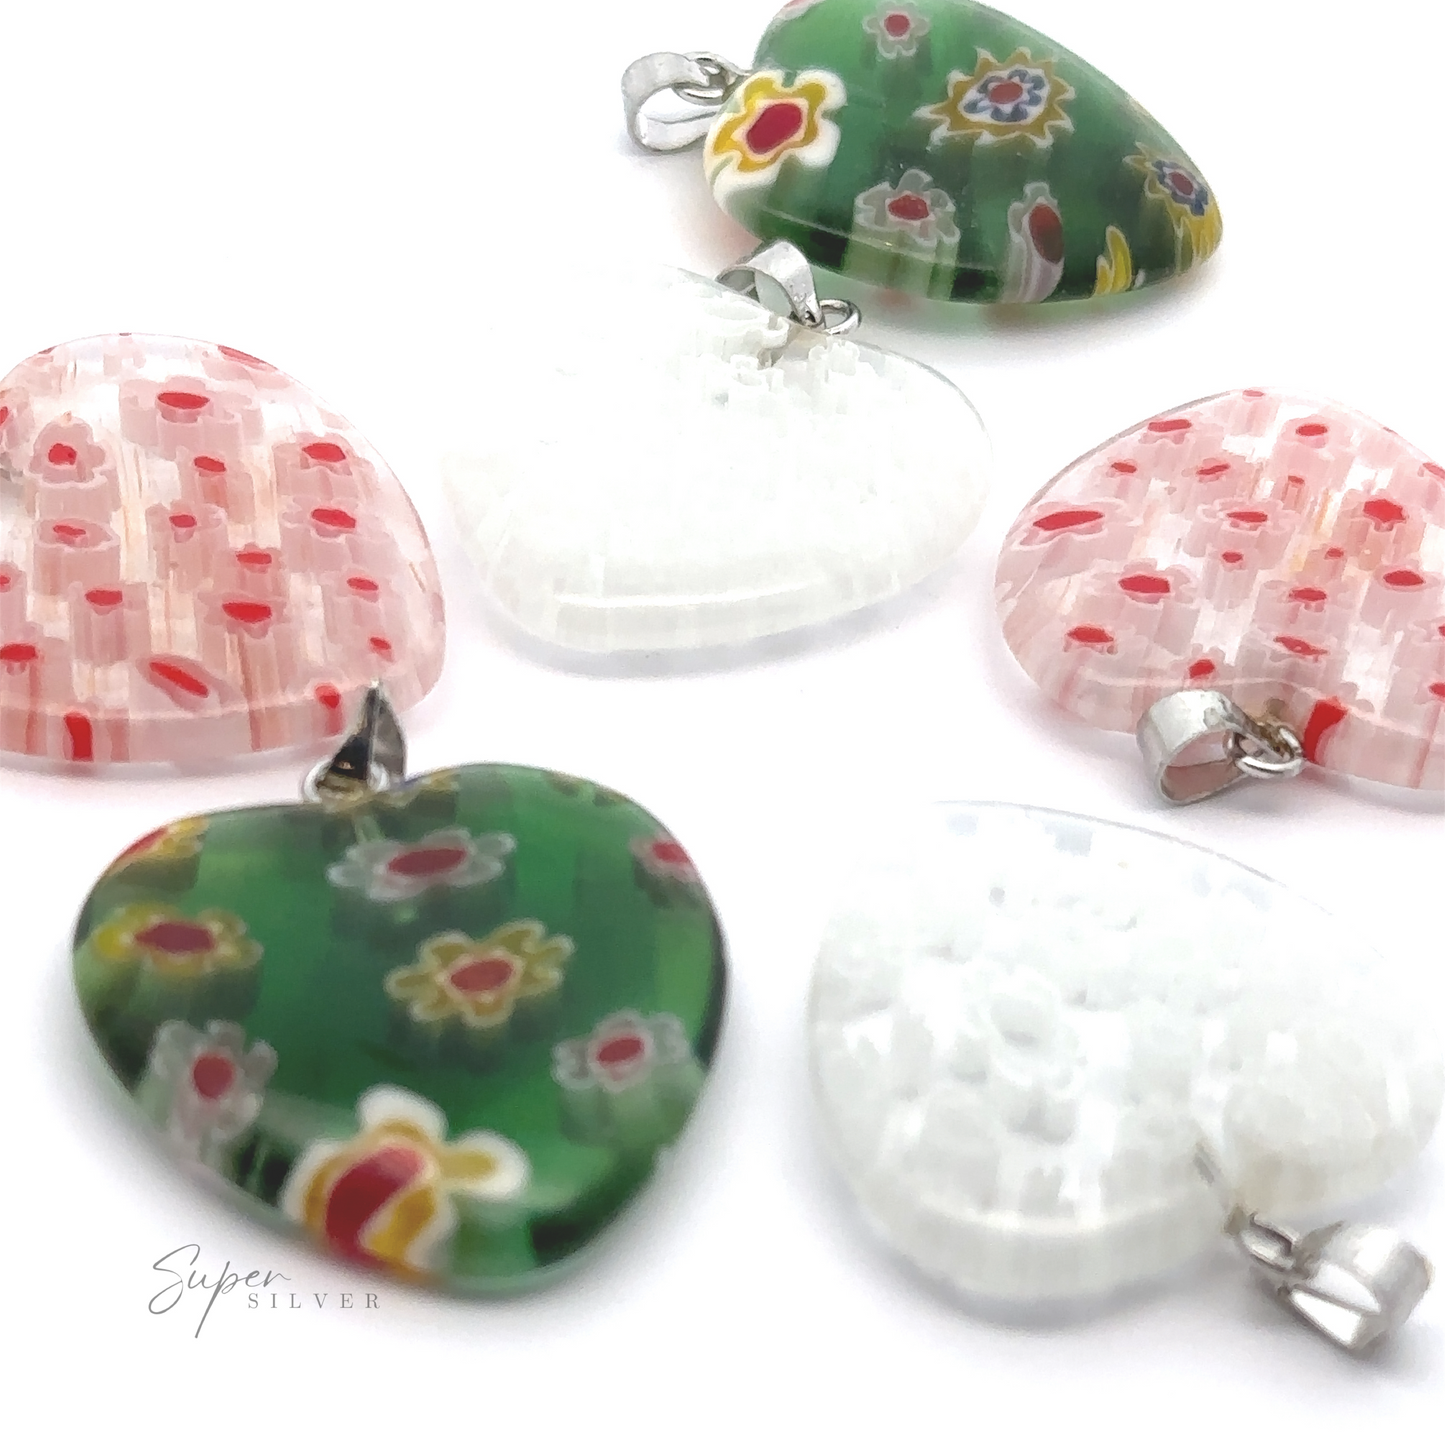 Six Heart Pendants with Flower Pattern in various colors, including white, green, and pink with floral designs, are arranged on a white background. The Super Silver logo is visible in the corner.